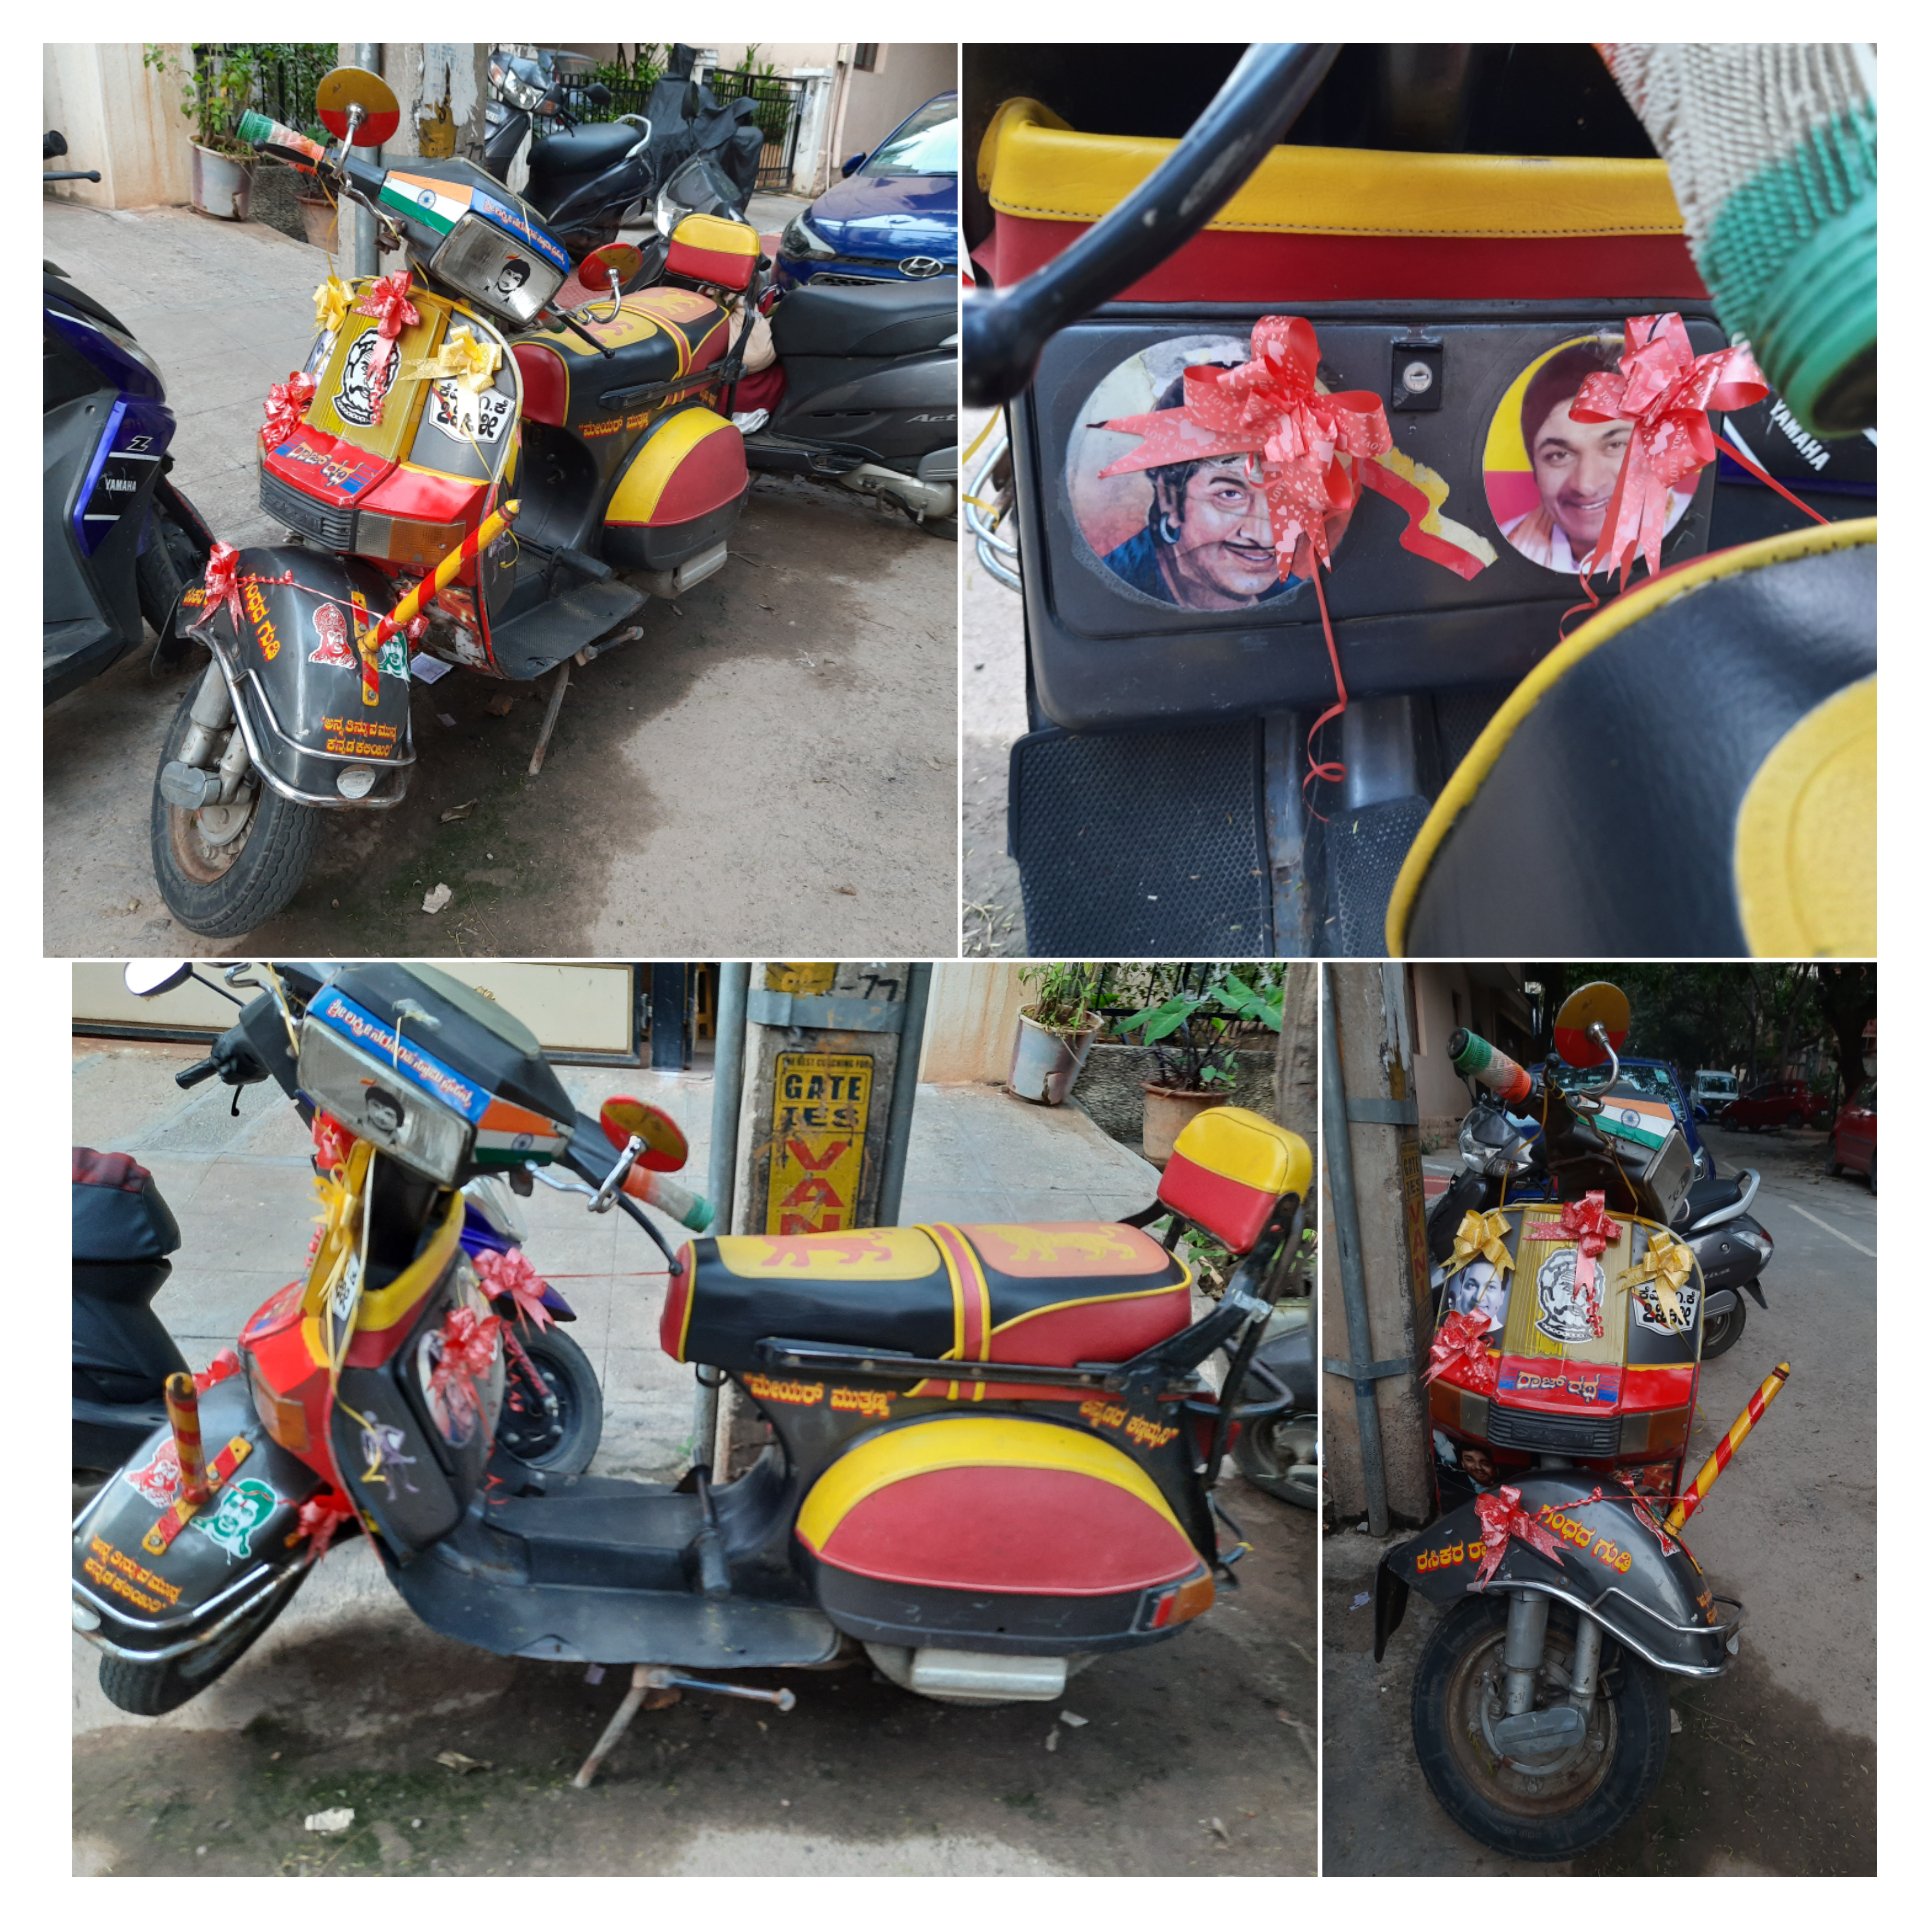 A scooter decked up in a Sandalwood theme (Kannada film industry)